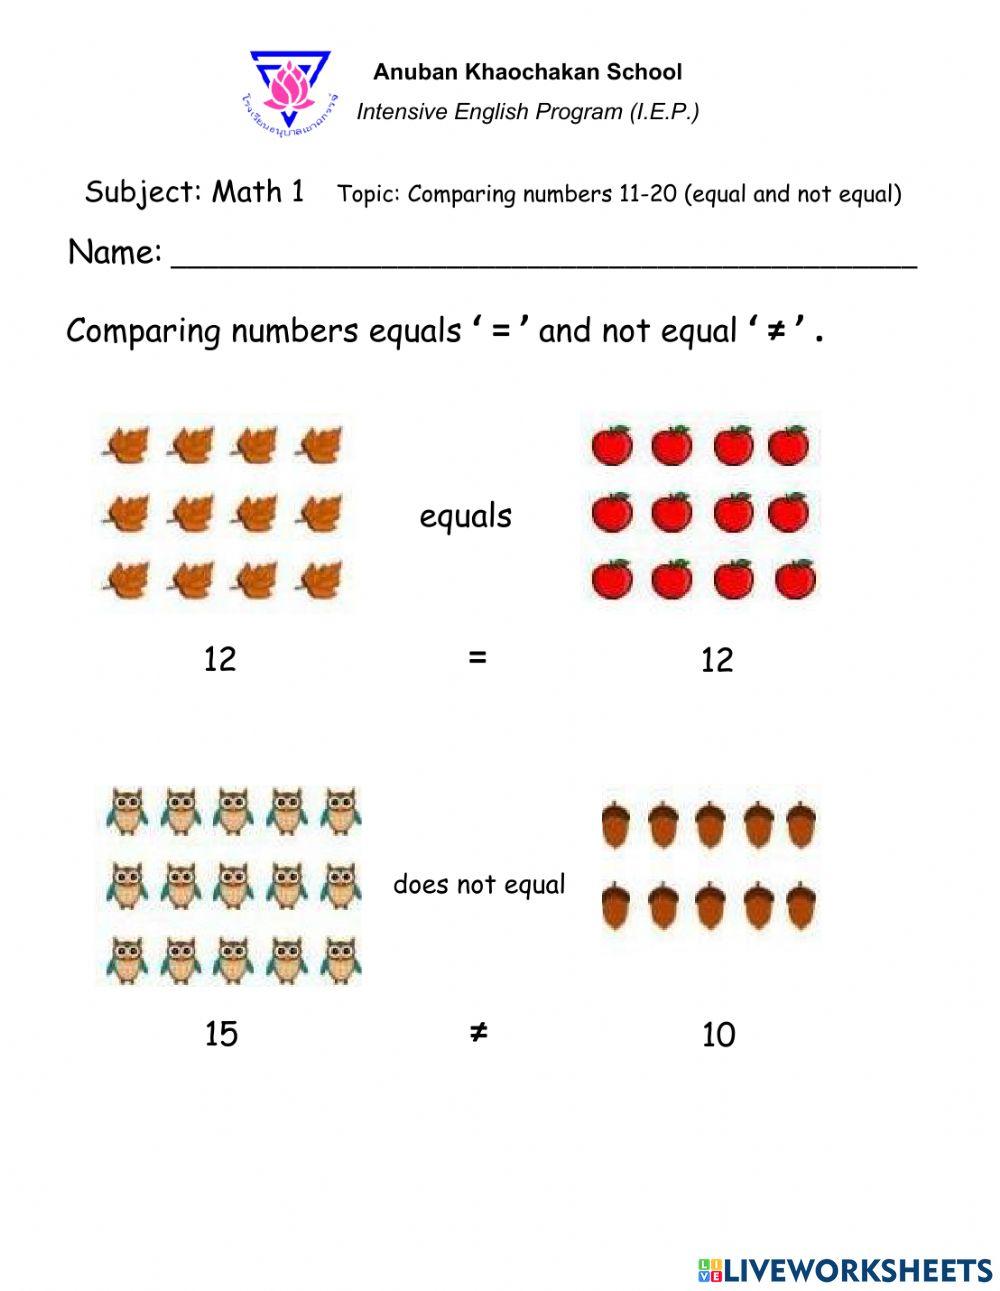 Comparing numbers 11-20 (equal and not equal)